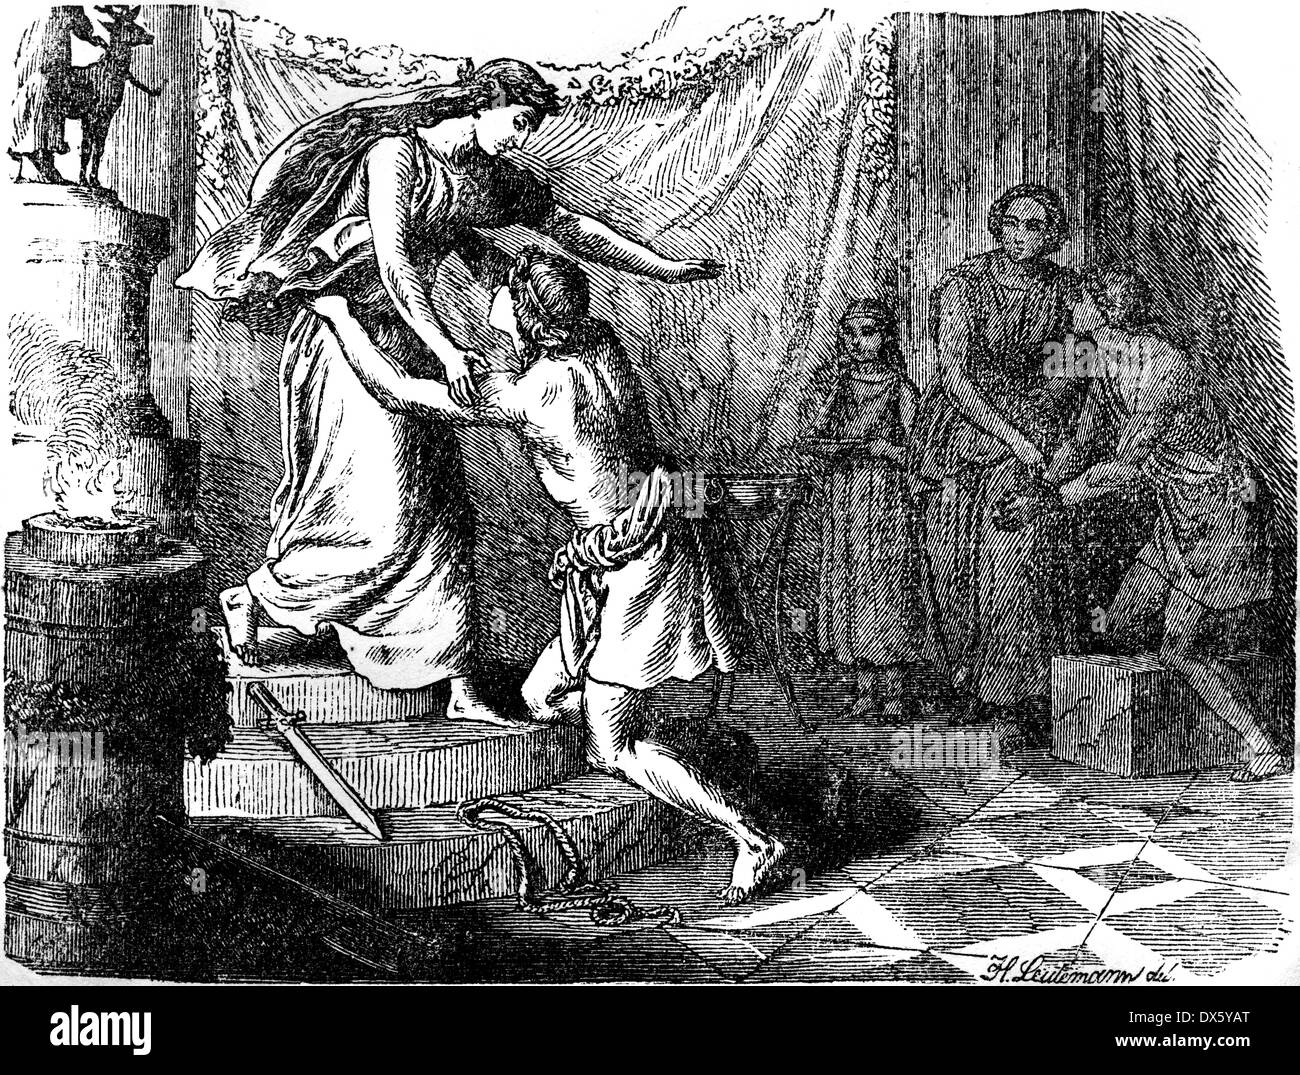 Iphigenia and Orestes, illustration from book dated 1878 Stock Photo